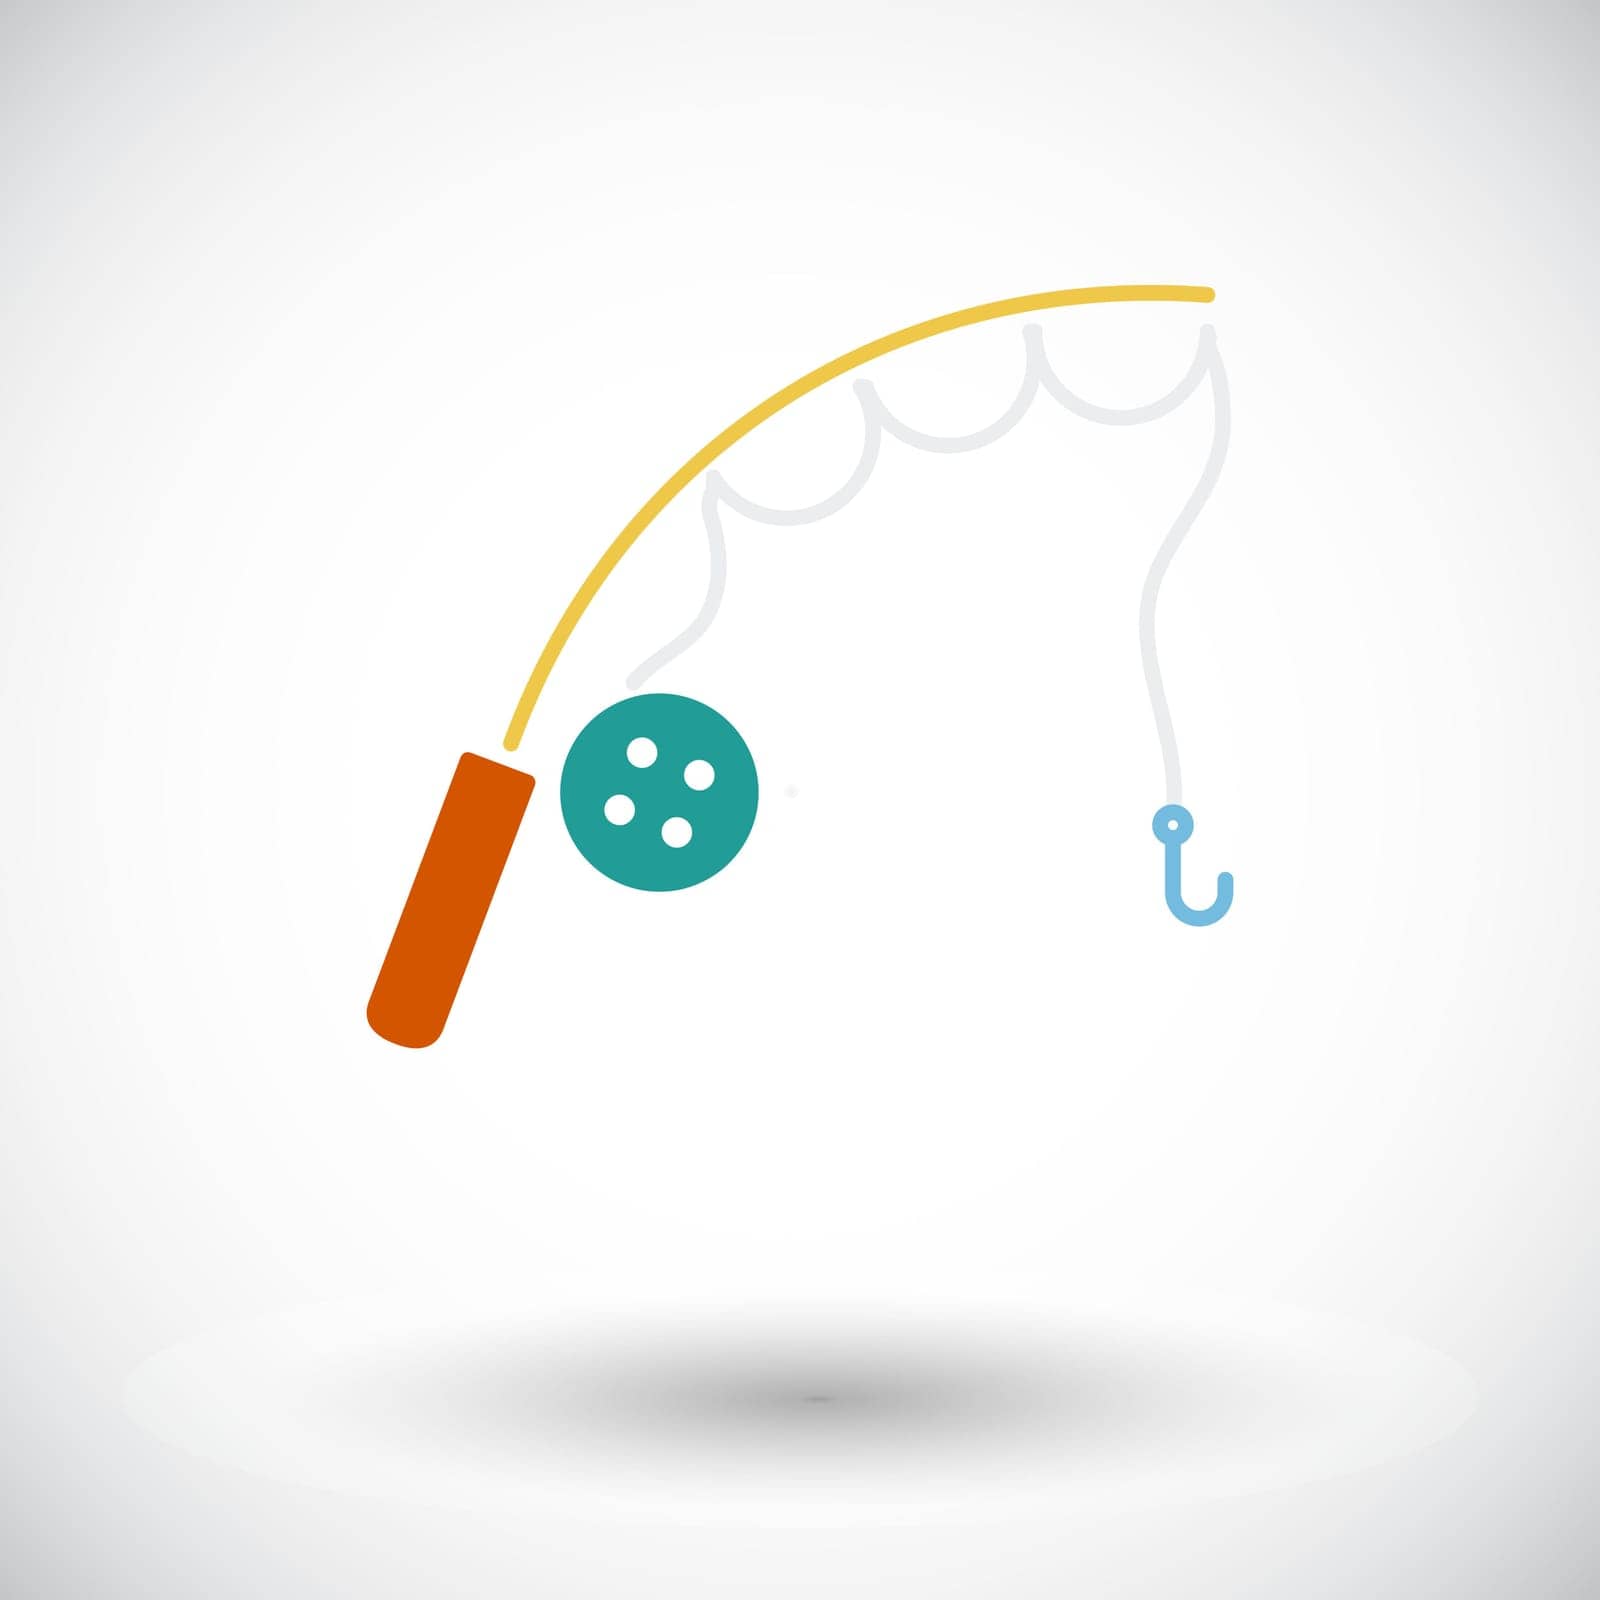 Fishing rod. Flat vector icon for mobile and web applications. Vector illustration.